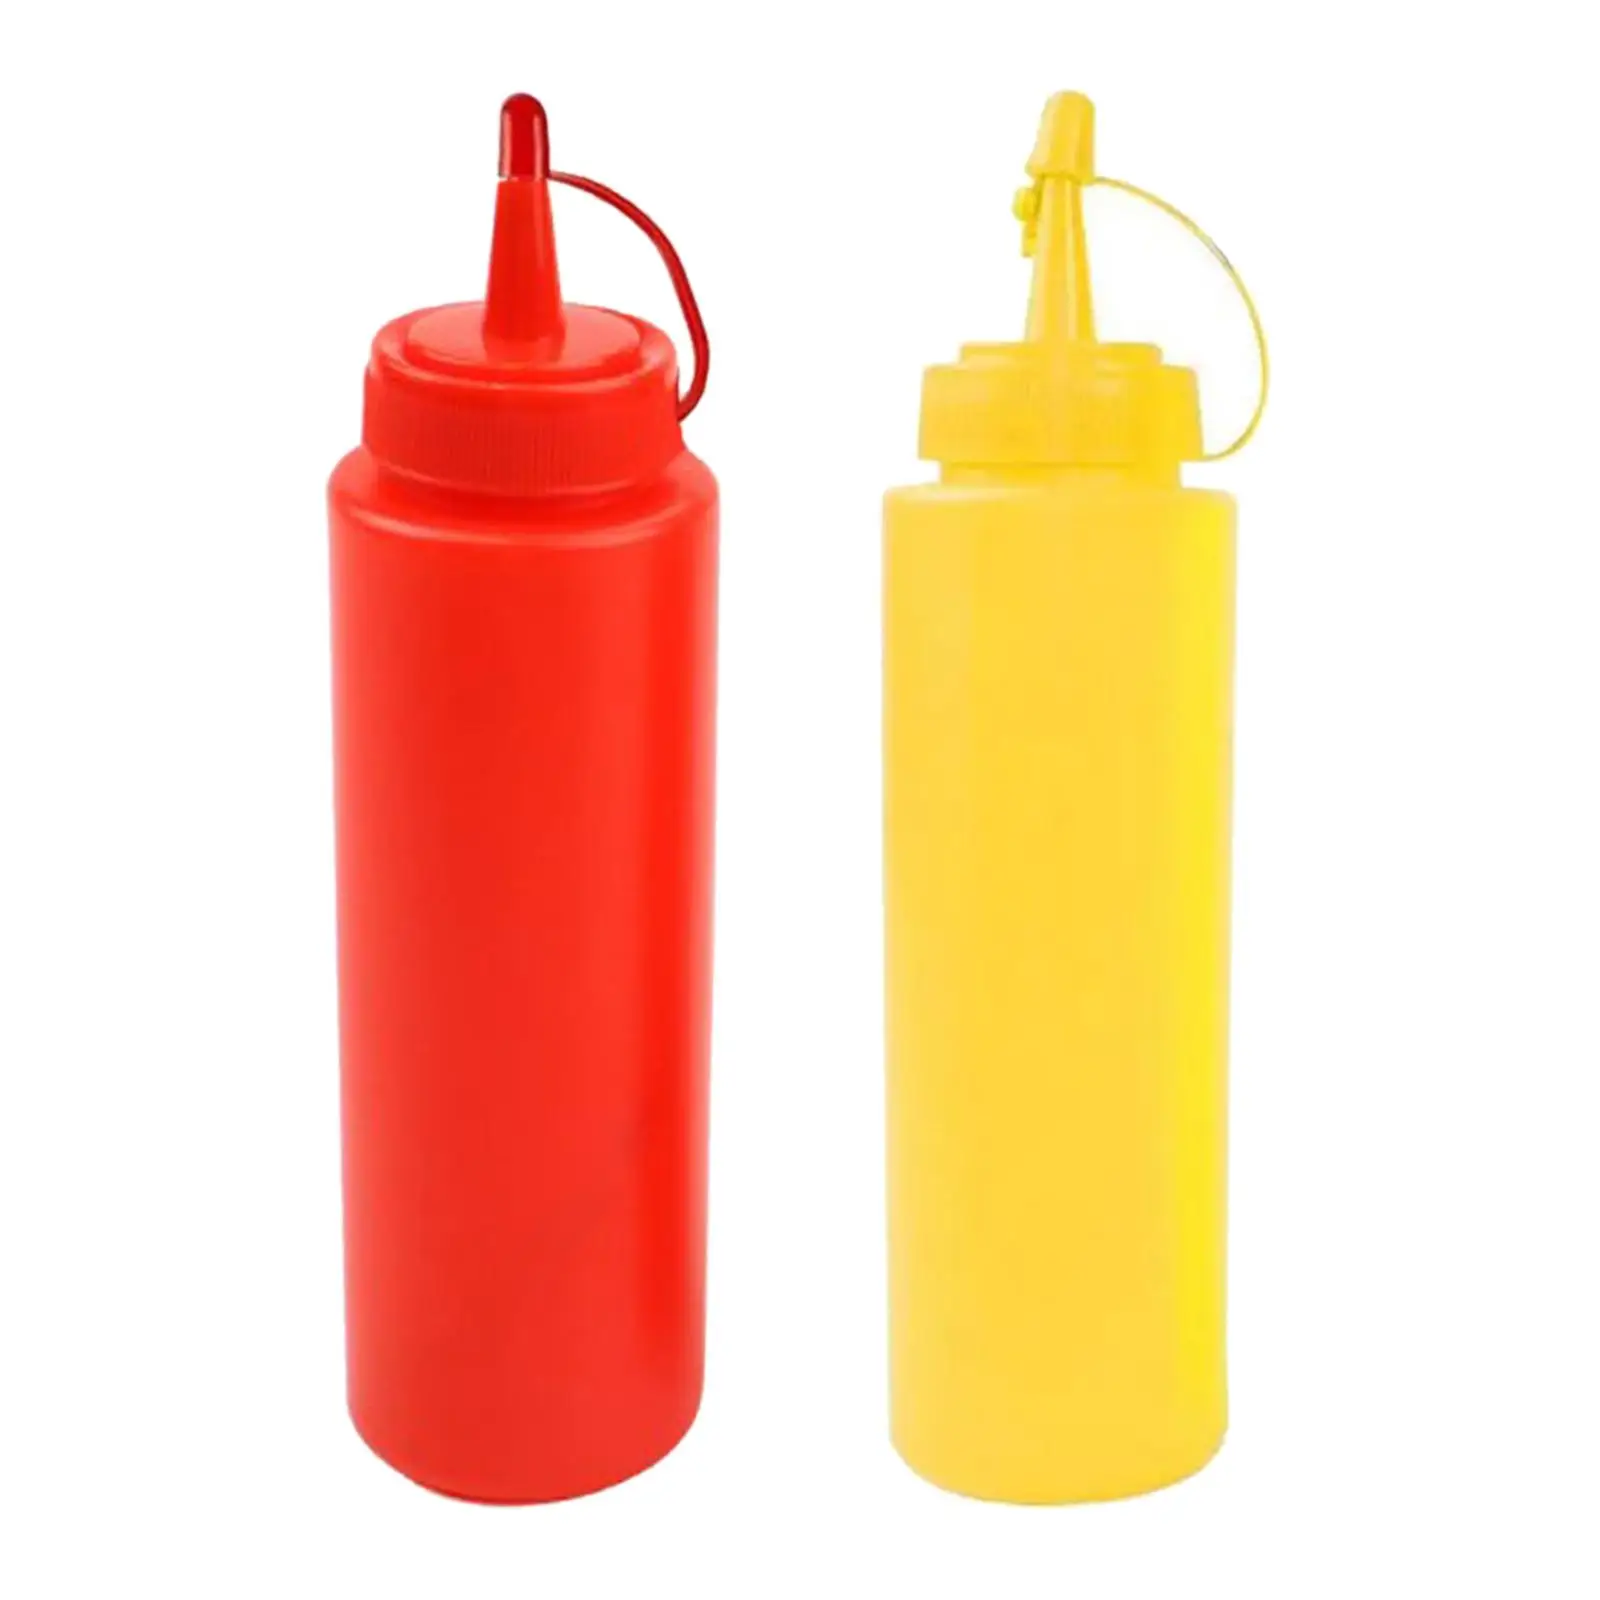 

Funny Ketchup Bottle Creative Photo Props Practical Joke Prop Fake Squirt Ketchup and Mustard Bottle for Carnival Party